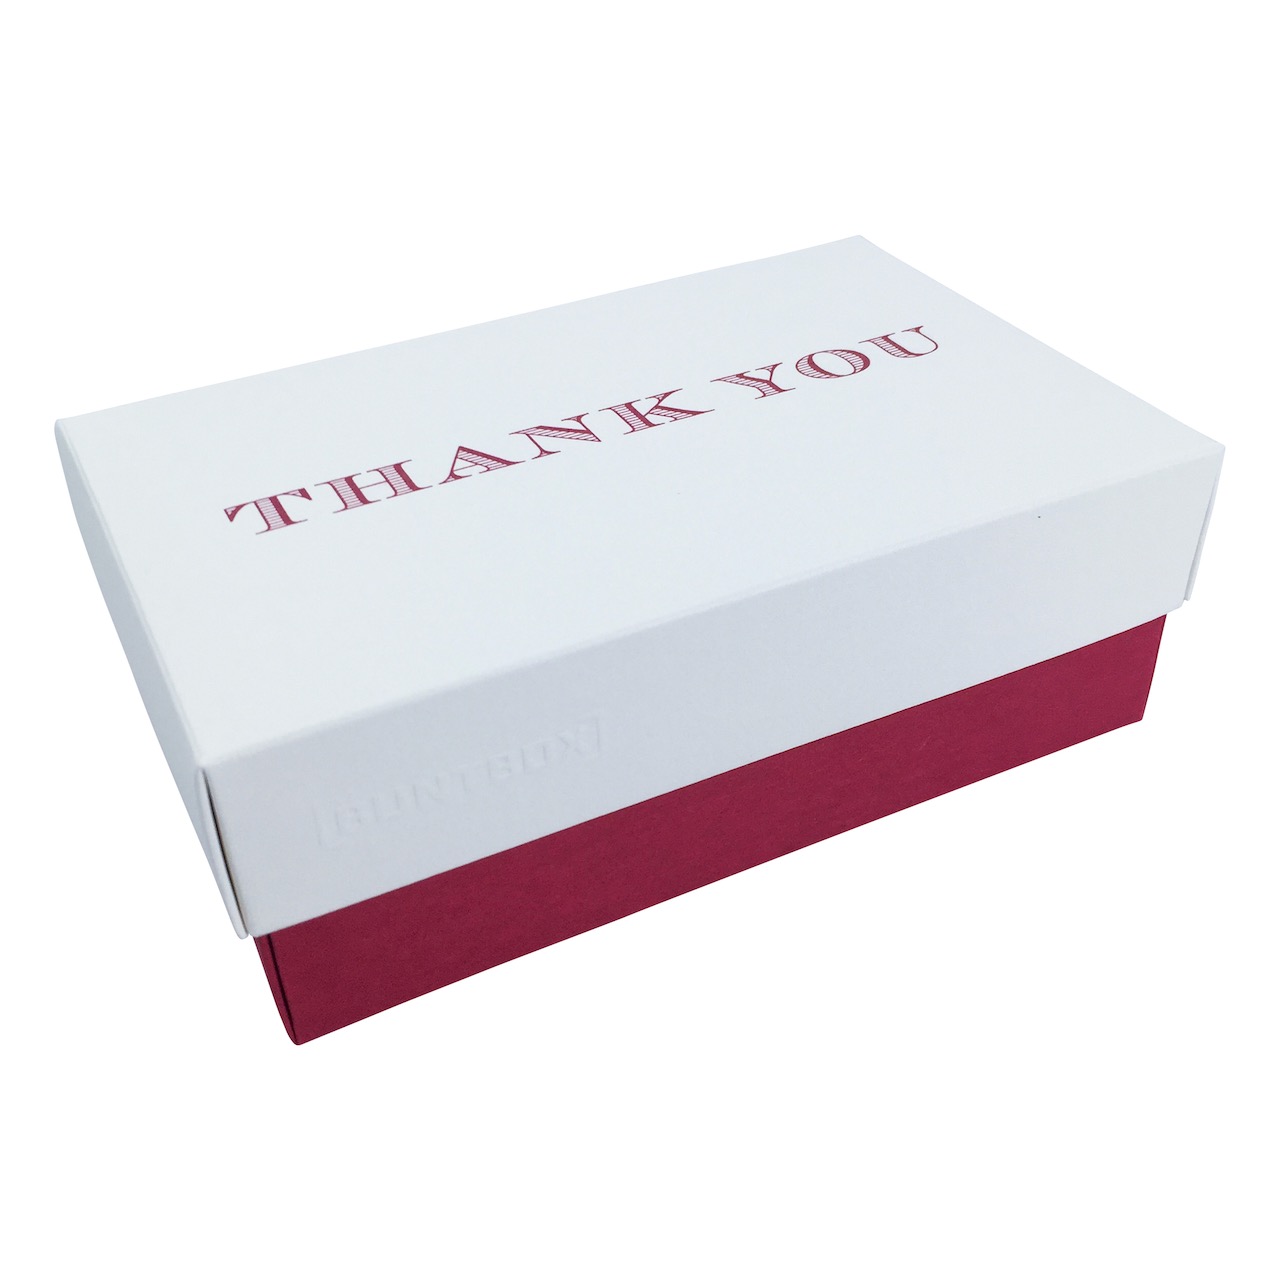 Fine Paper Edition Buntbox Champagne - Bordeaux 'Thank You' - Red